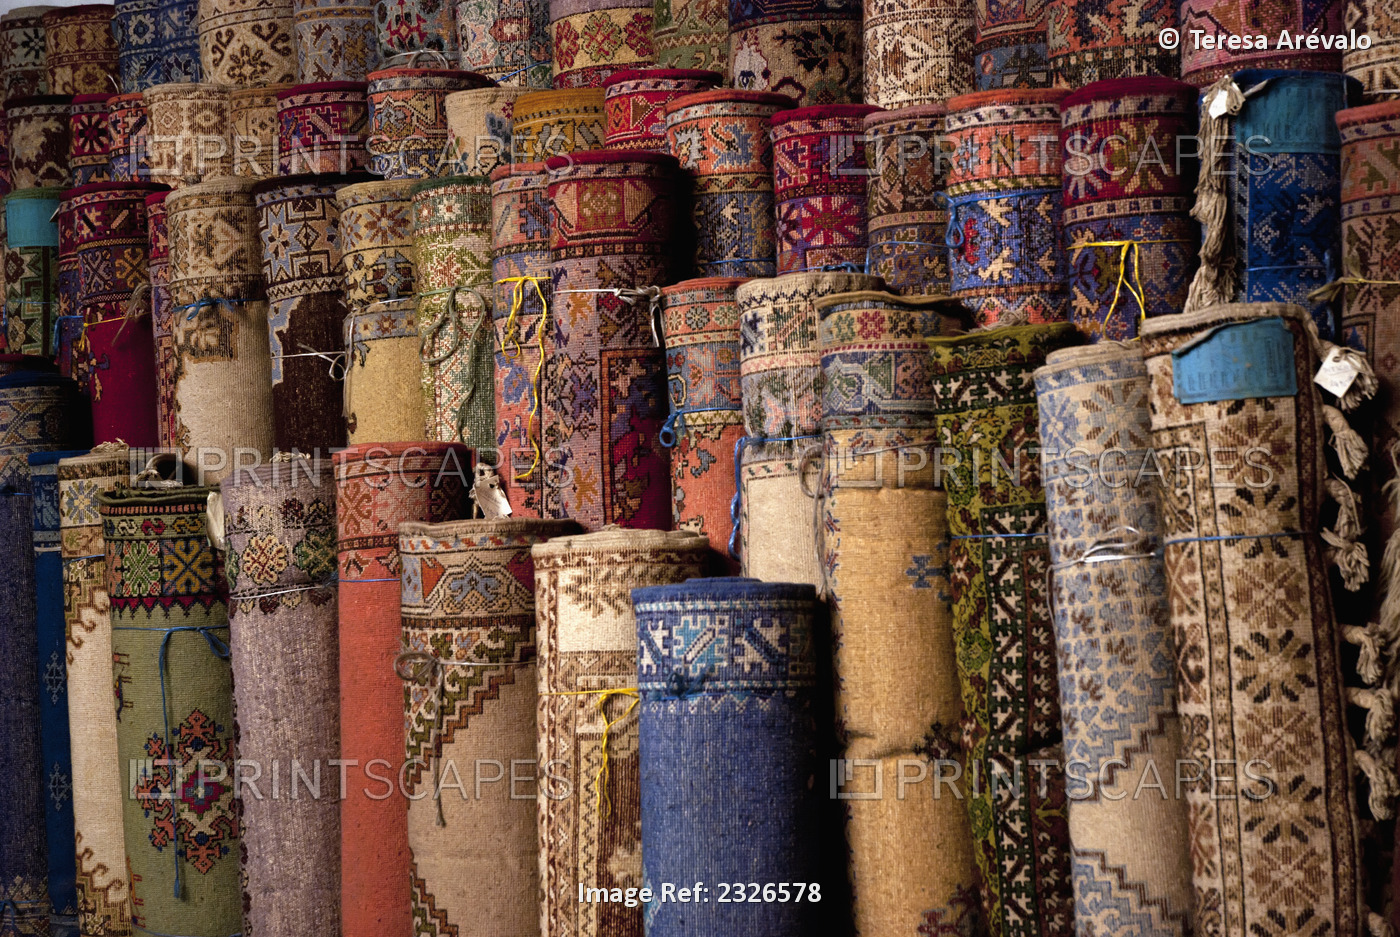 Morocco, Marrakech, Traditional rugs for sale